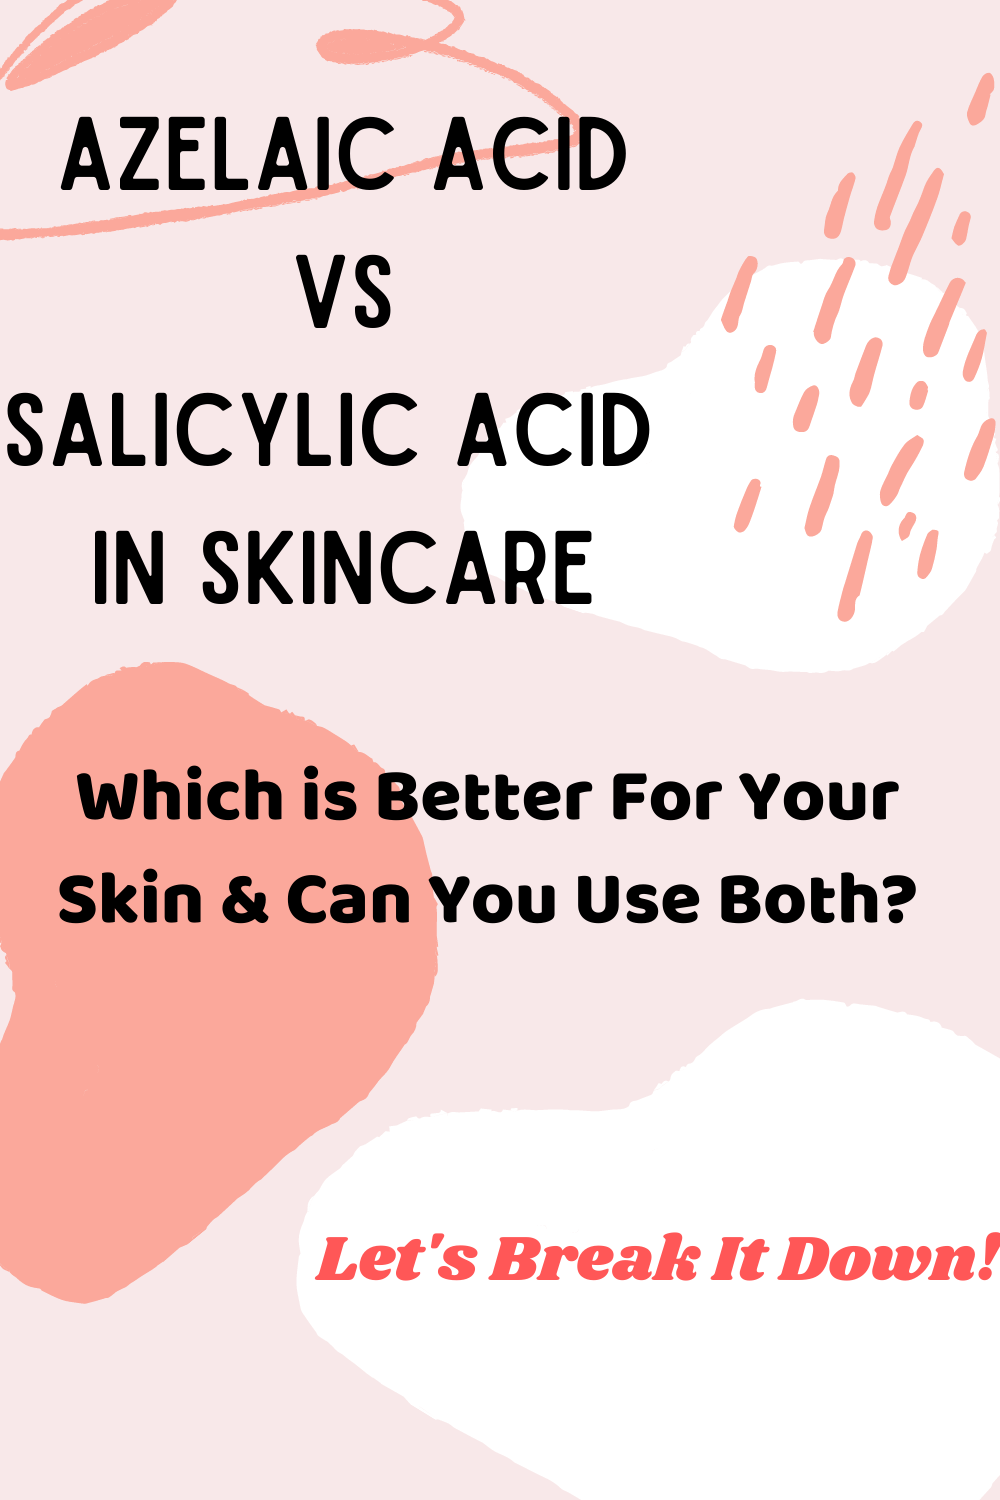 Azelaic Acid vs Salicylic Acid - Which is Better & Can You Use Both?